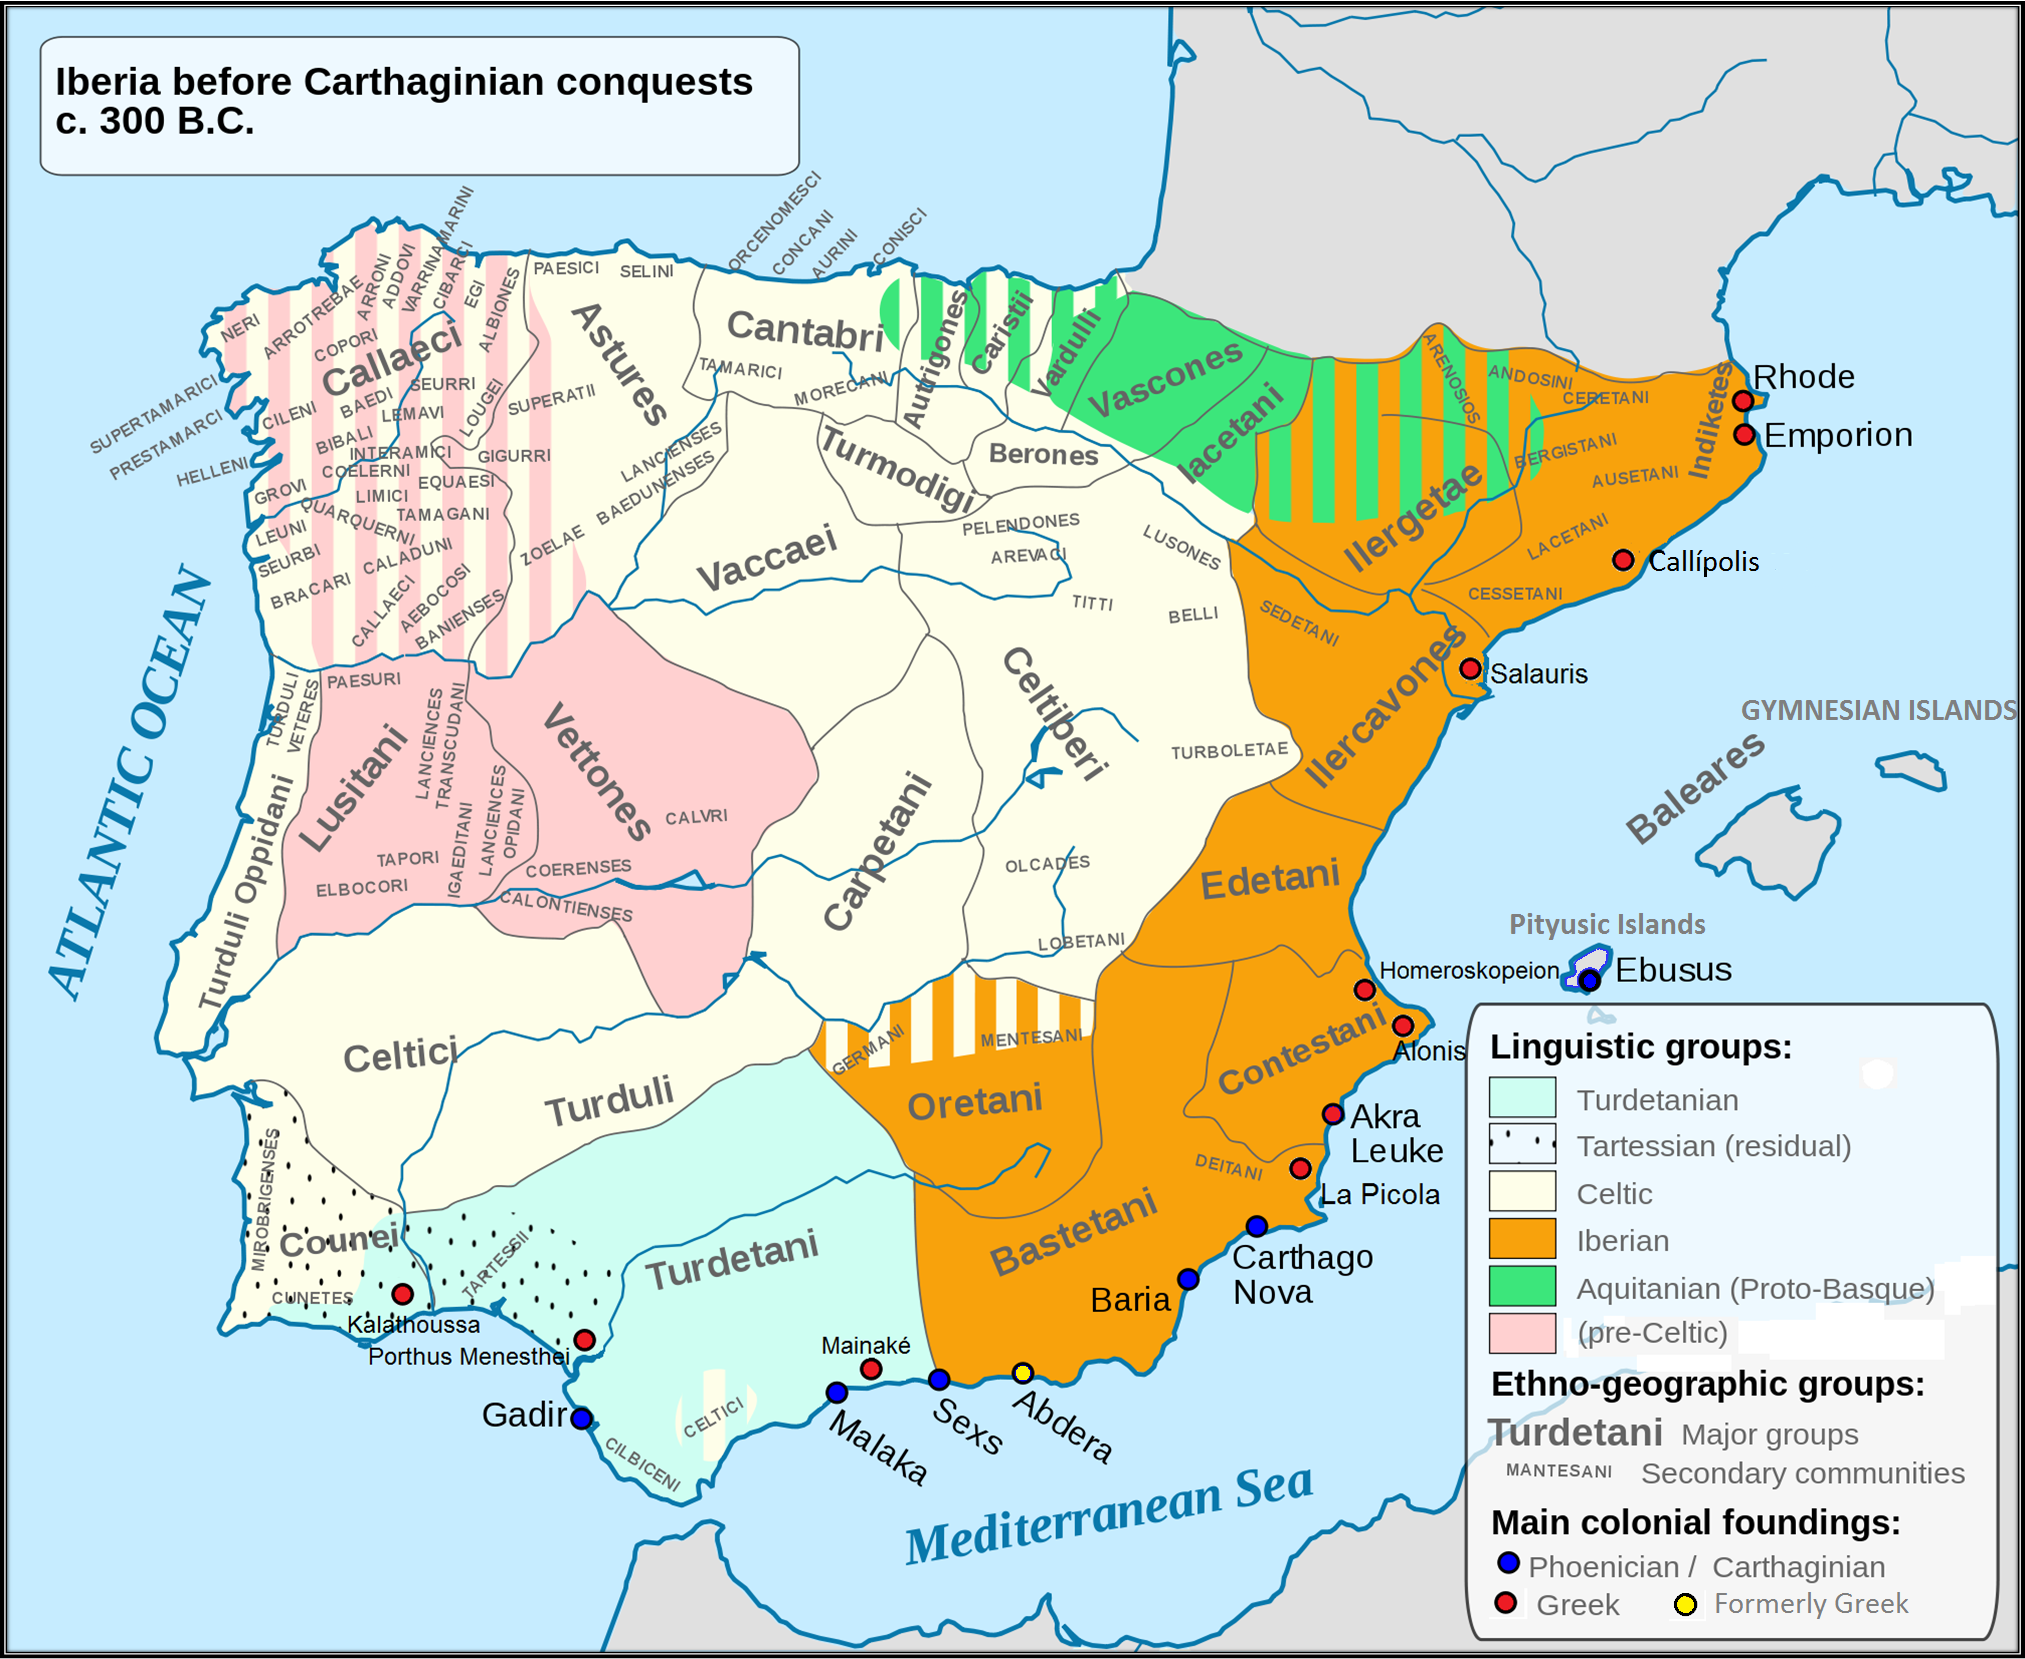 Greek_and_Phoenician_Colonies_in_The_Ibe